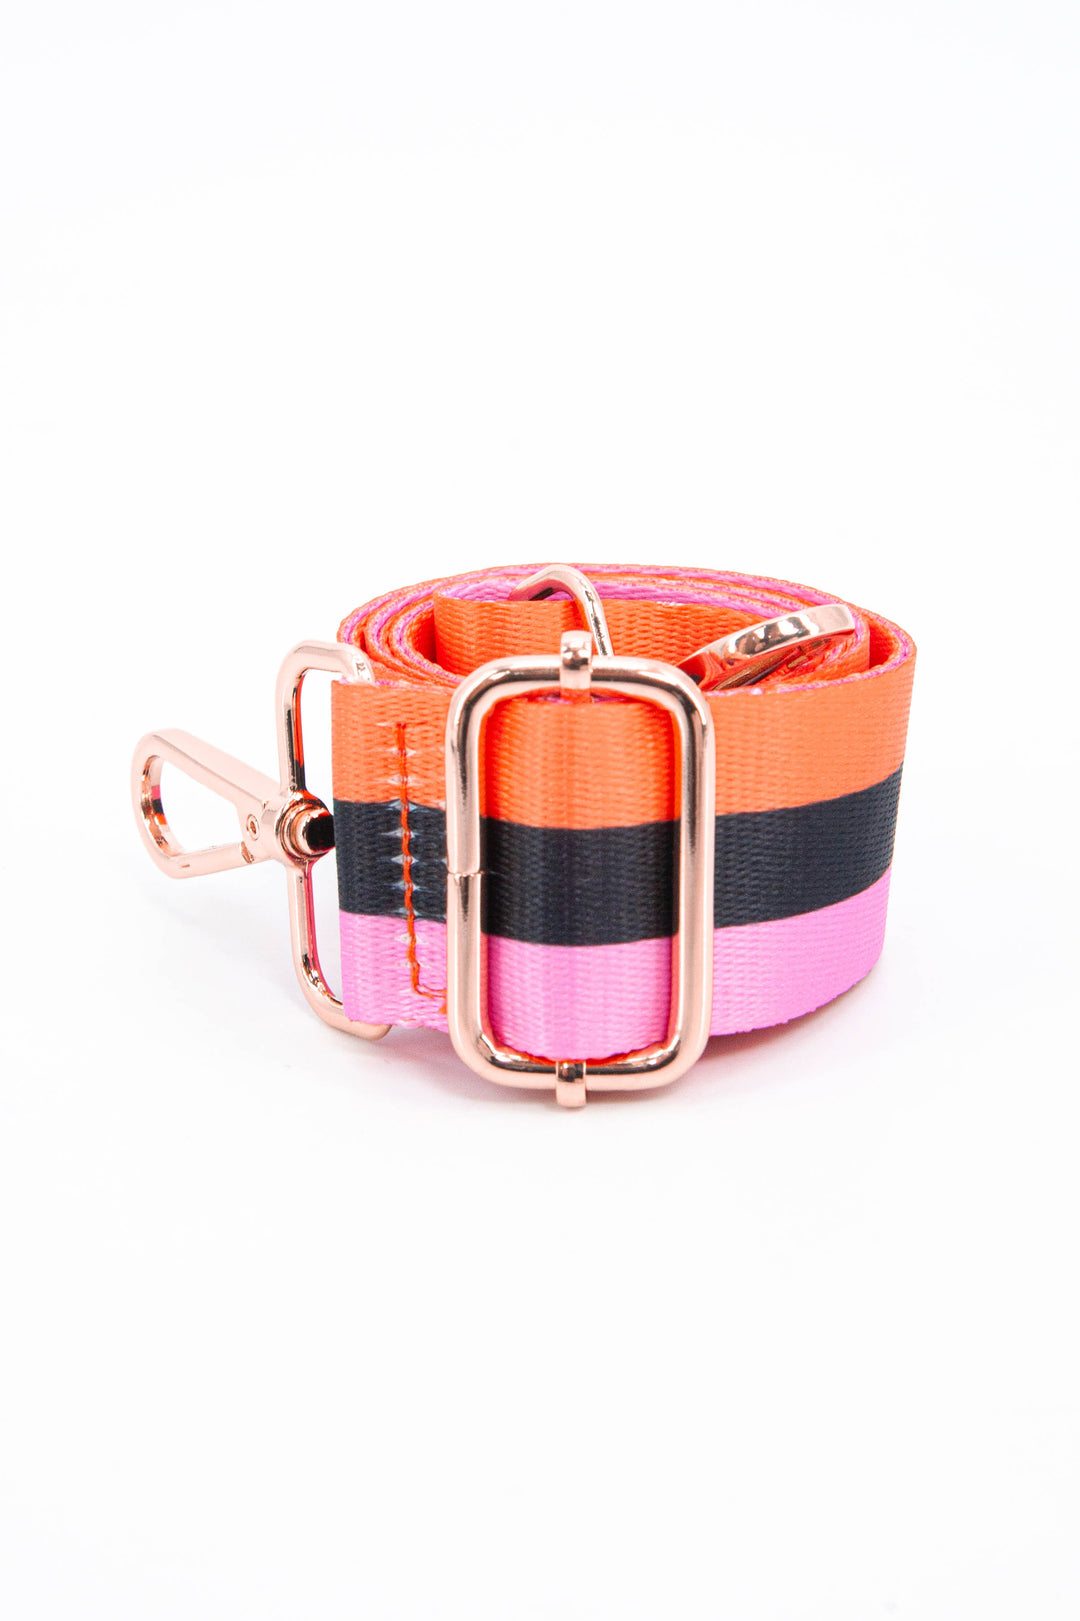 close up of the gold adjustable buckle and three contrasting stripes of orange, black and pink